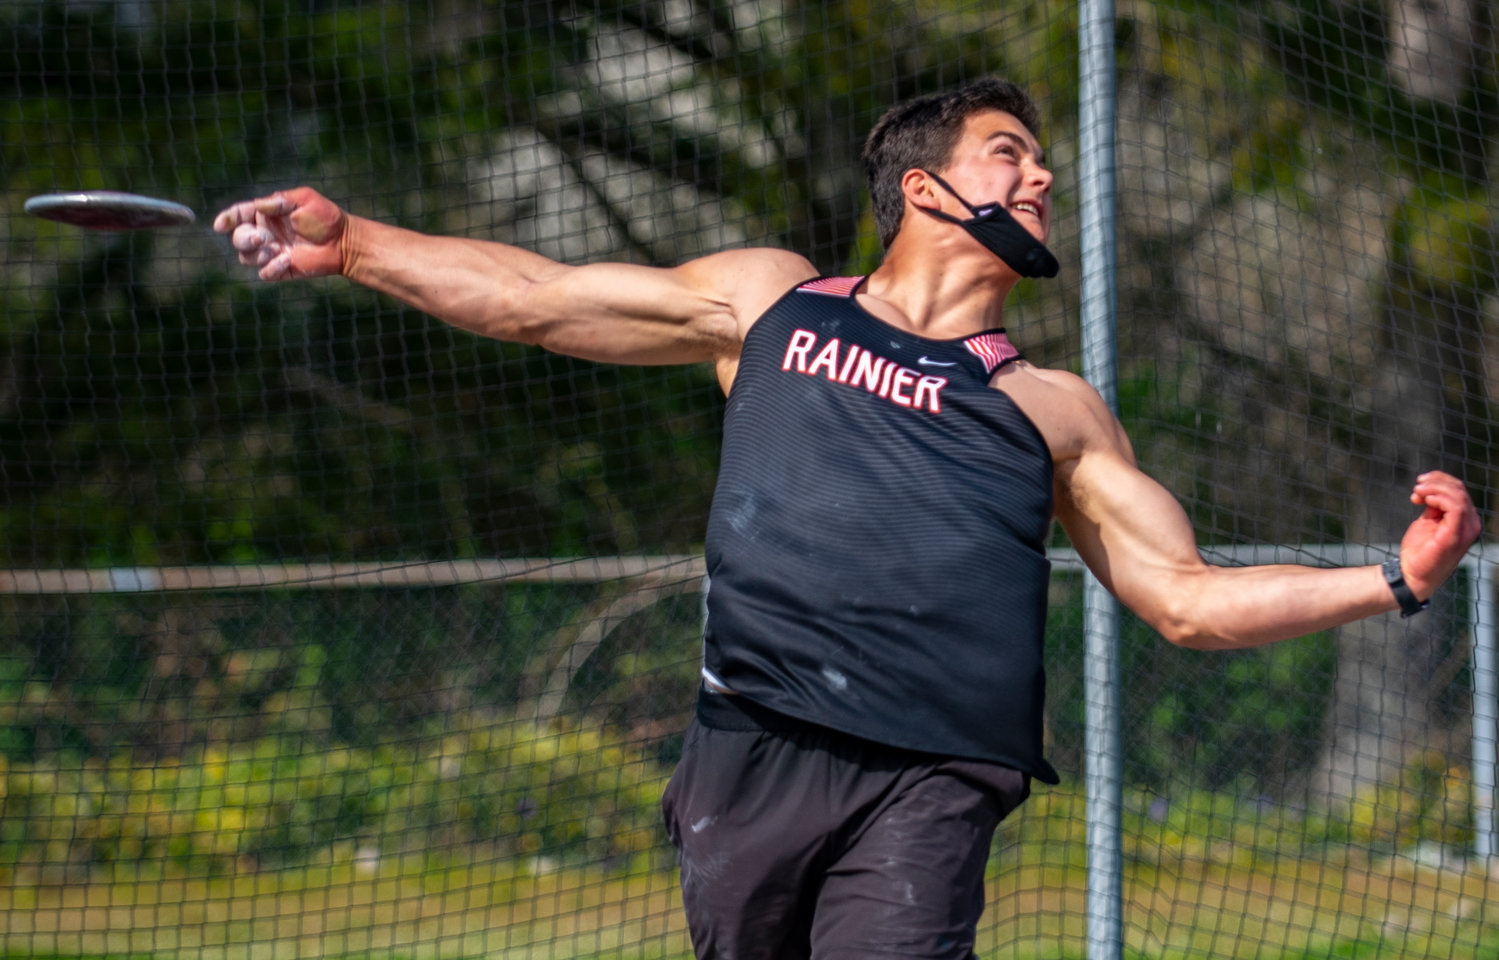 FILE PHOTO -- Rainier junior Jeremiah Nubbe broke the Washington state junior discus throw record with a toss of 196 feet even at a meet in Tenino last season.